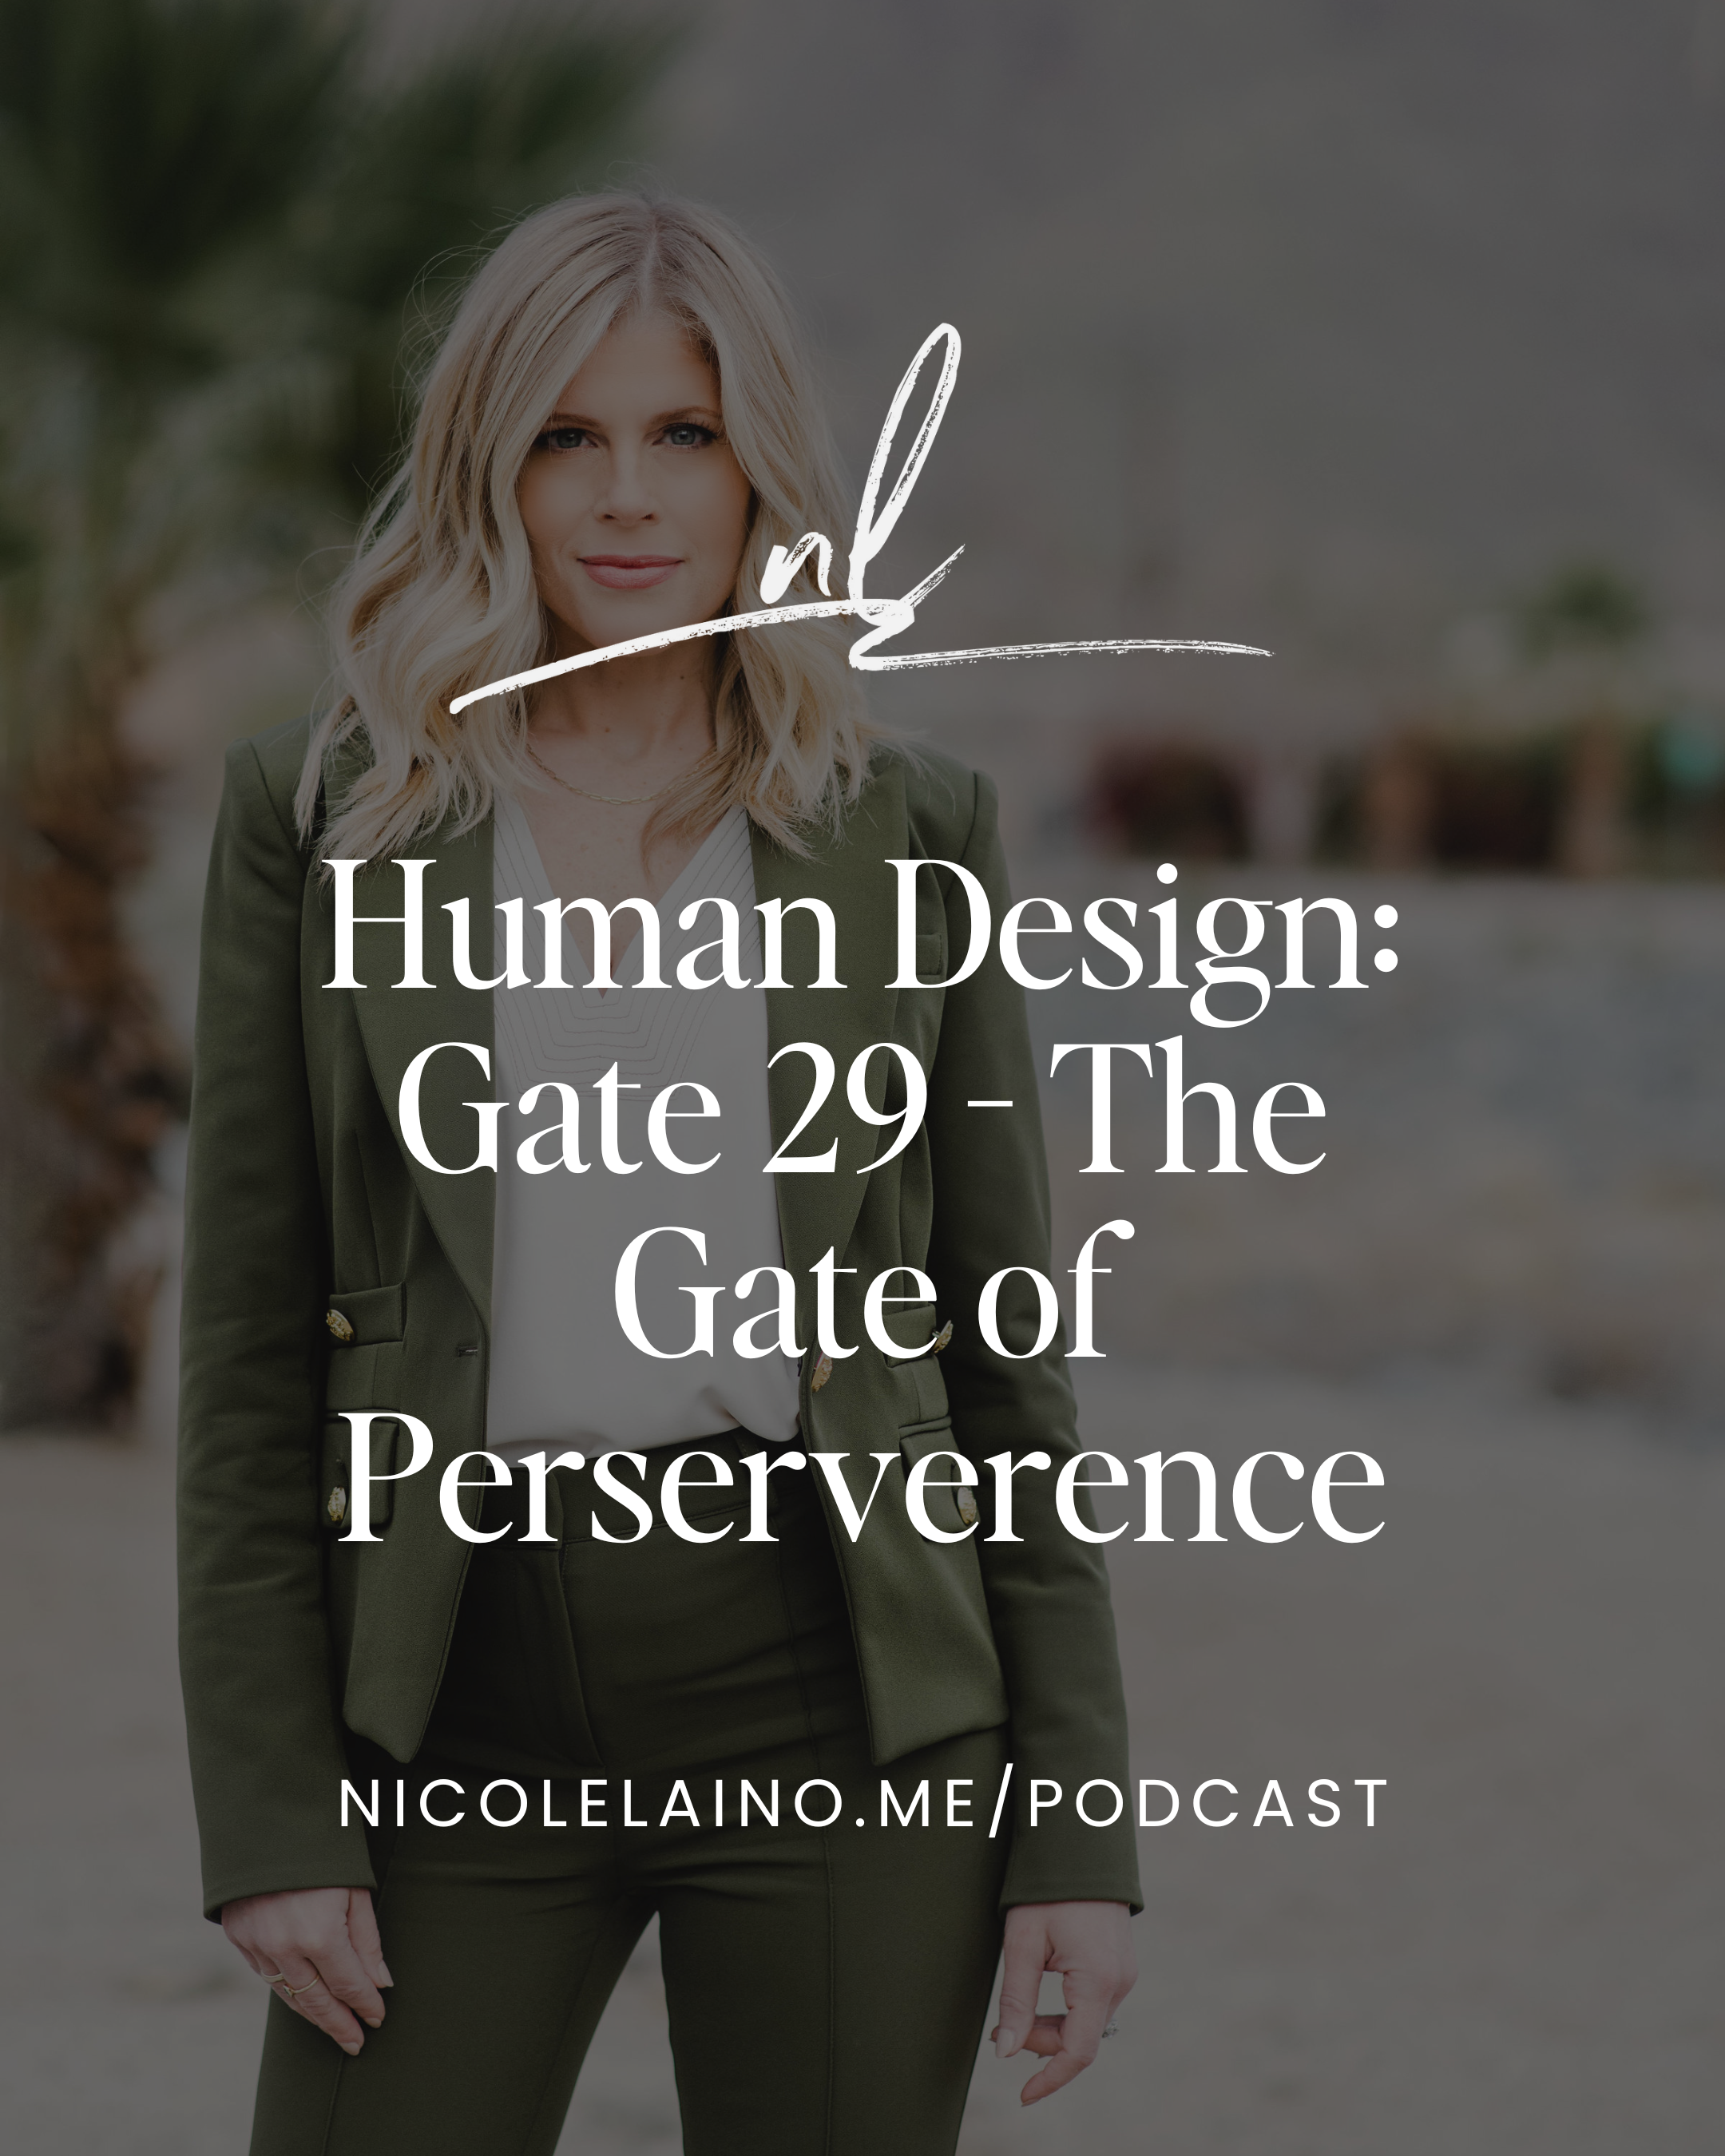 Human Design: Gate 29 - The Gate of Perserverence